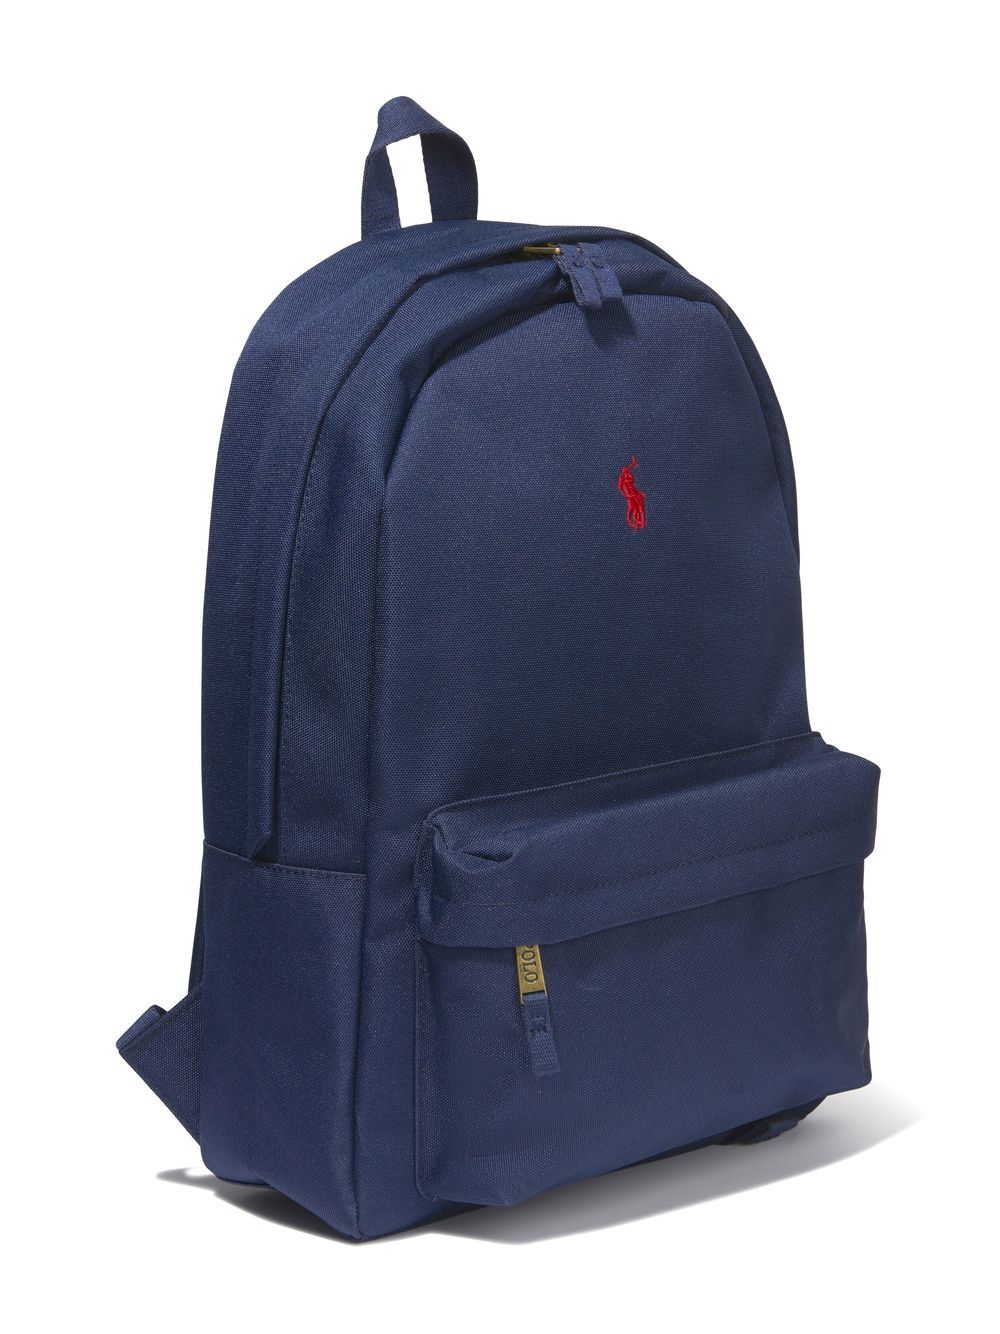 embroidered Polo-Pony backpack